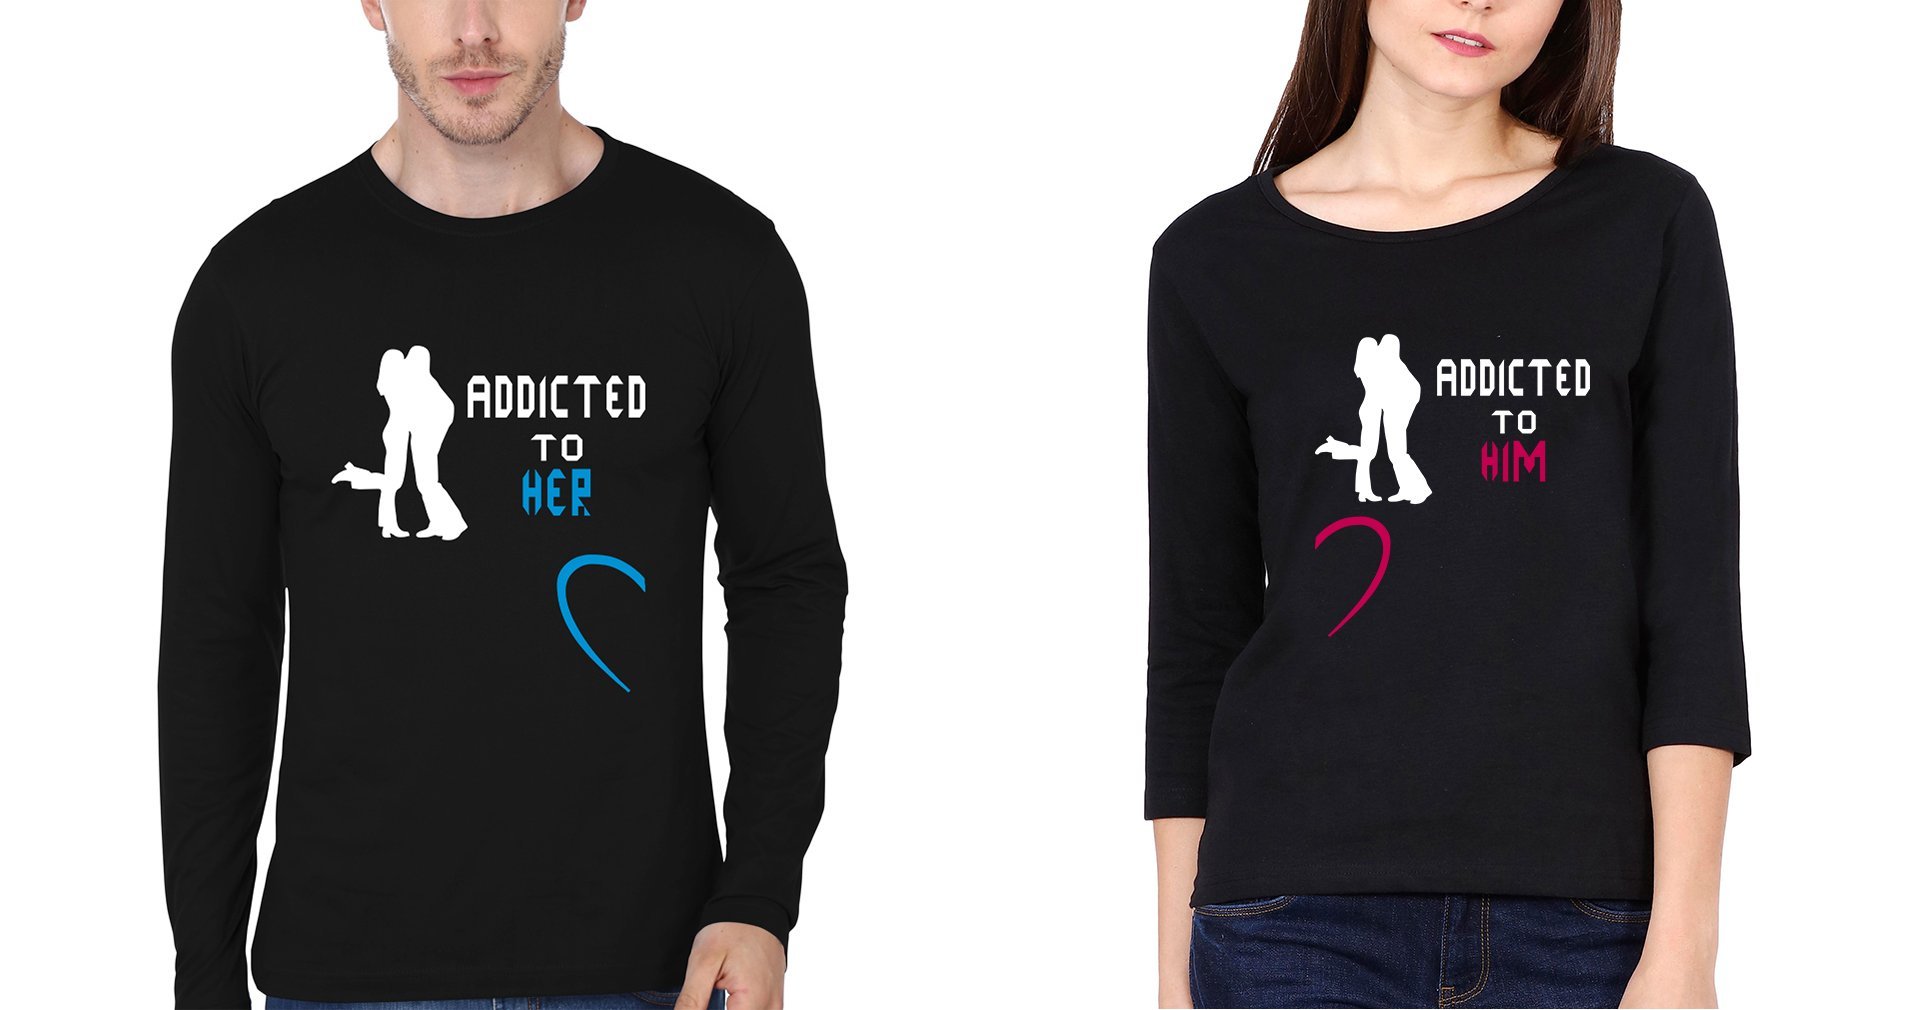 Addicted to her him Couple Full Sleeves T-Shirts -FunkyTees - Funky Tees Club